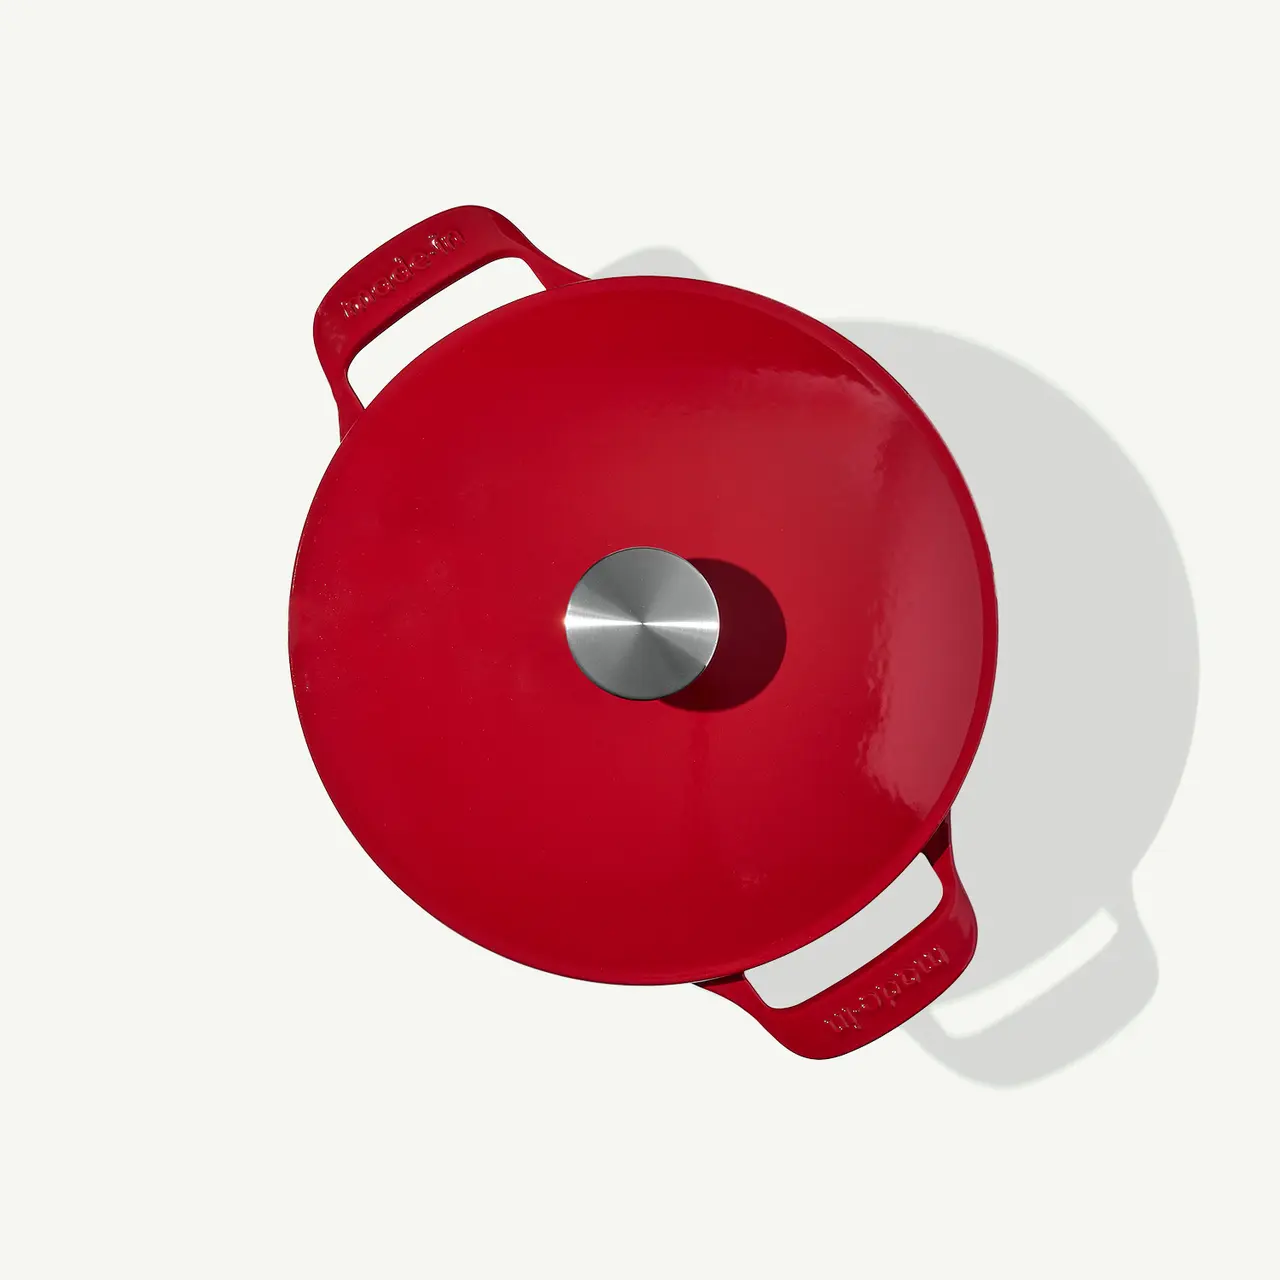 A red saucepan with two handles and a silver circular lid knob is viewed from above against a light background.